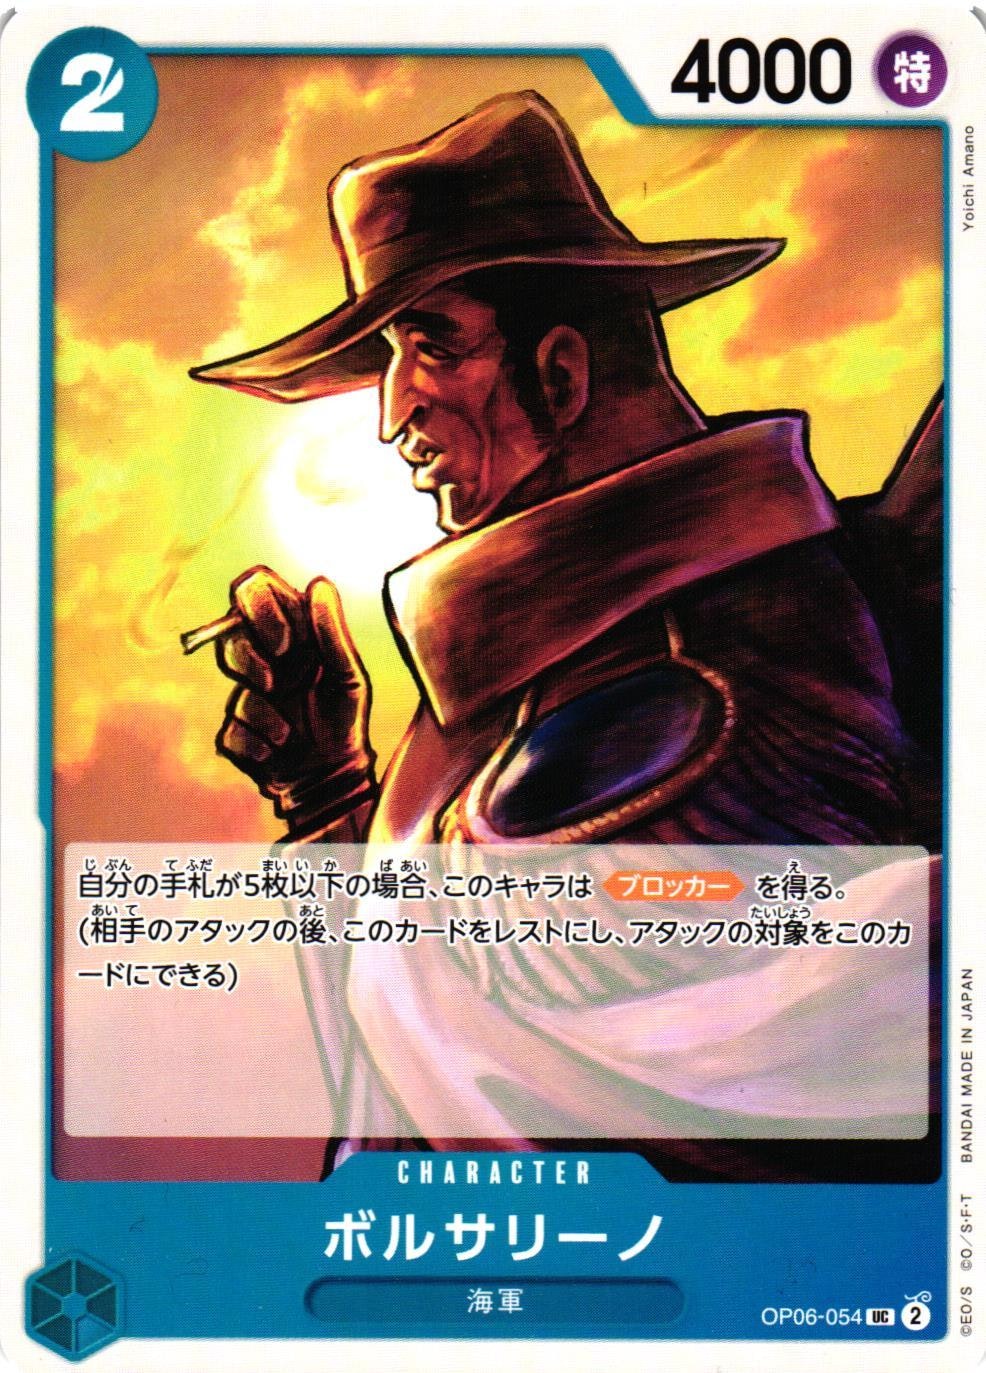 Borsalino Uncommon OP06-054 Wings of the Captain One Piece